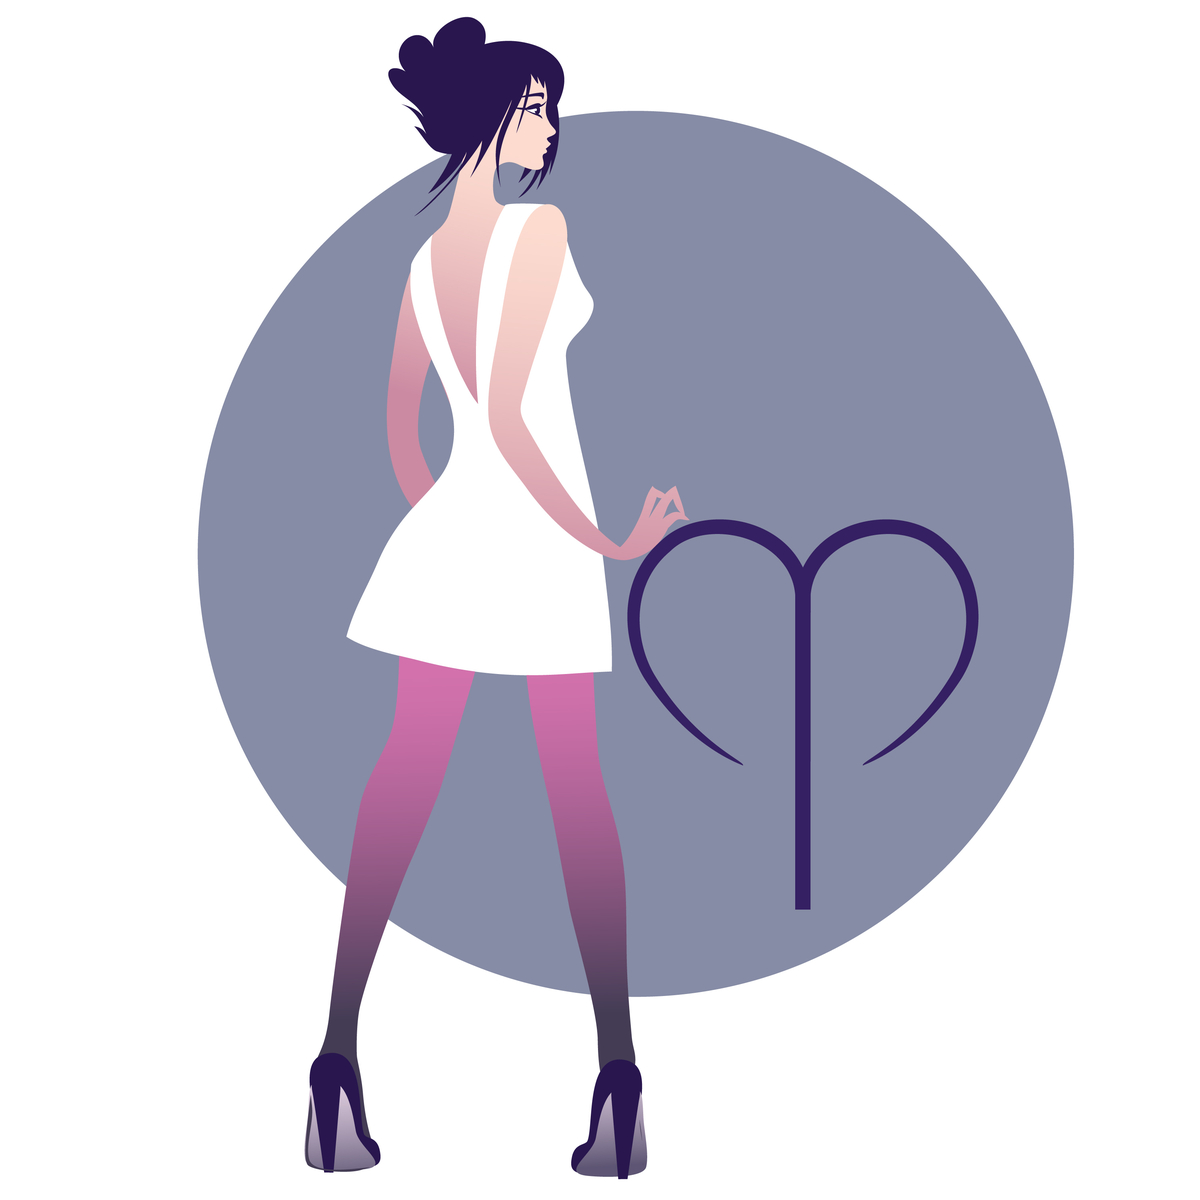 Woman with white dress and purple stockings standing with her back turned with the Aries Zodiac Sign next to her.